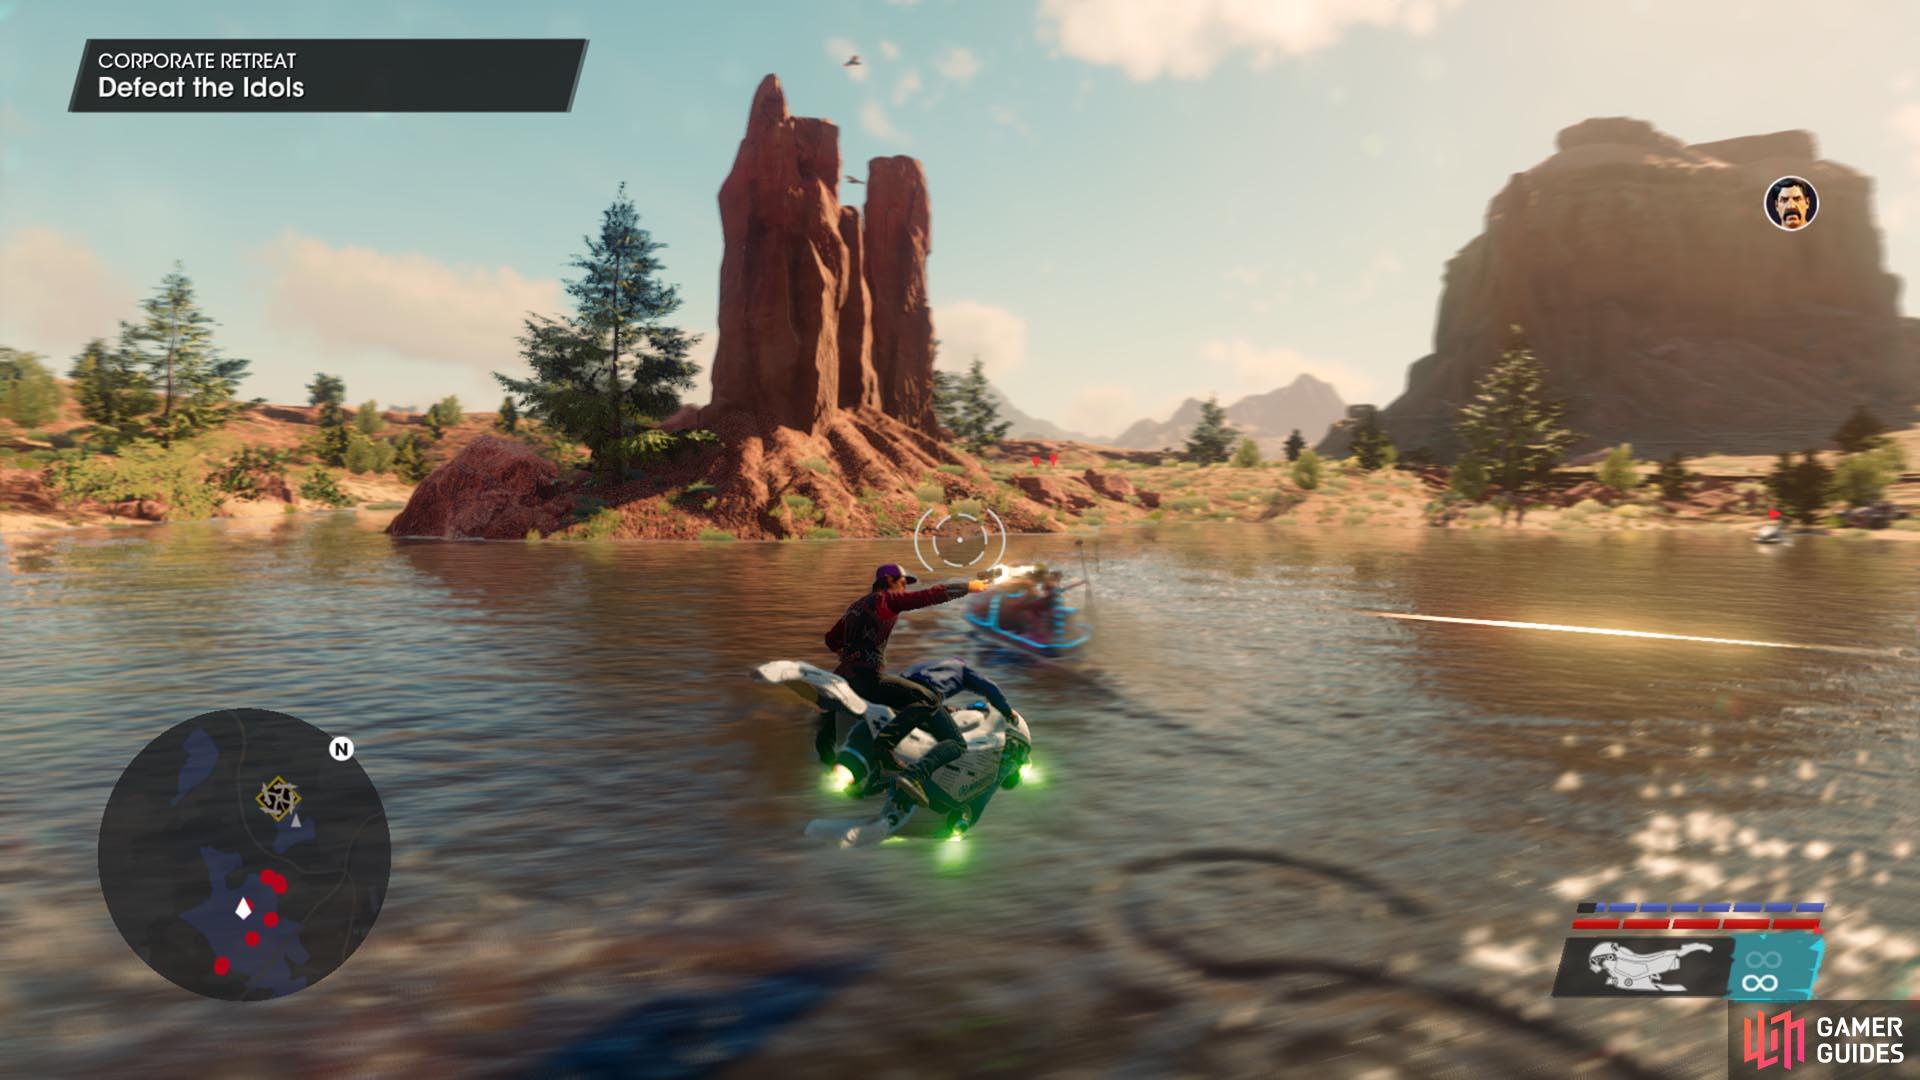 The hoverbike is easy to control across water or land.